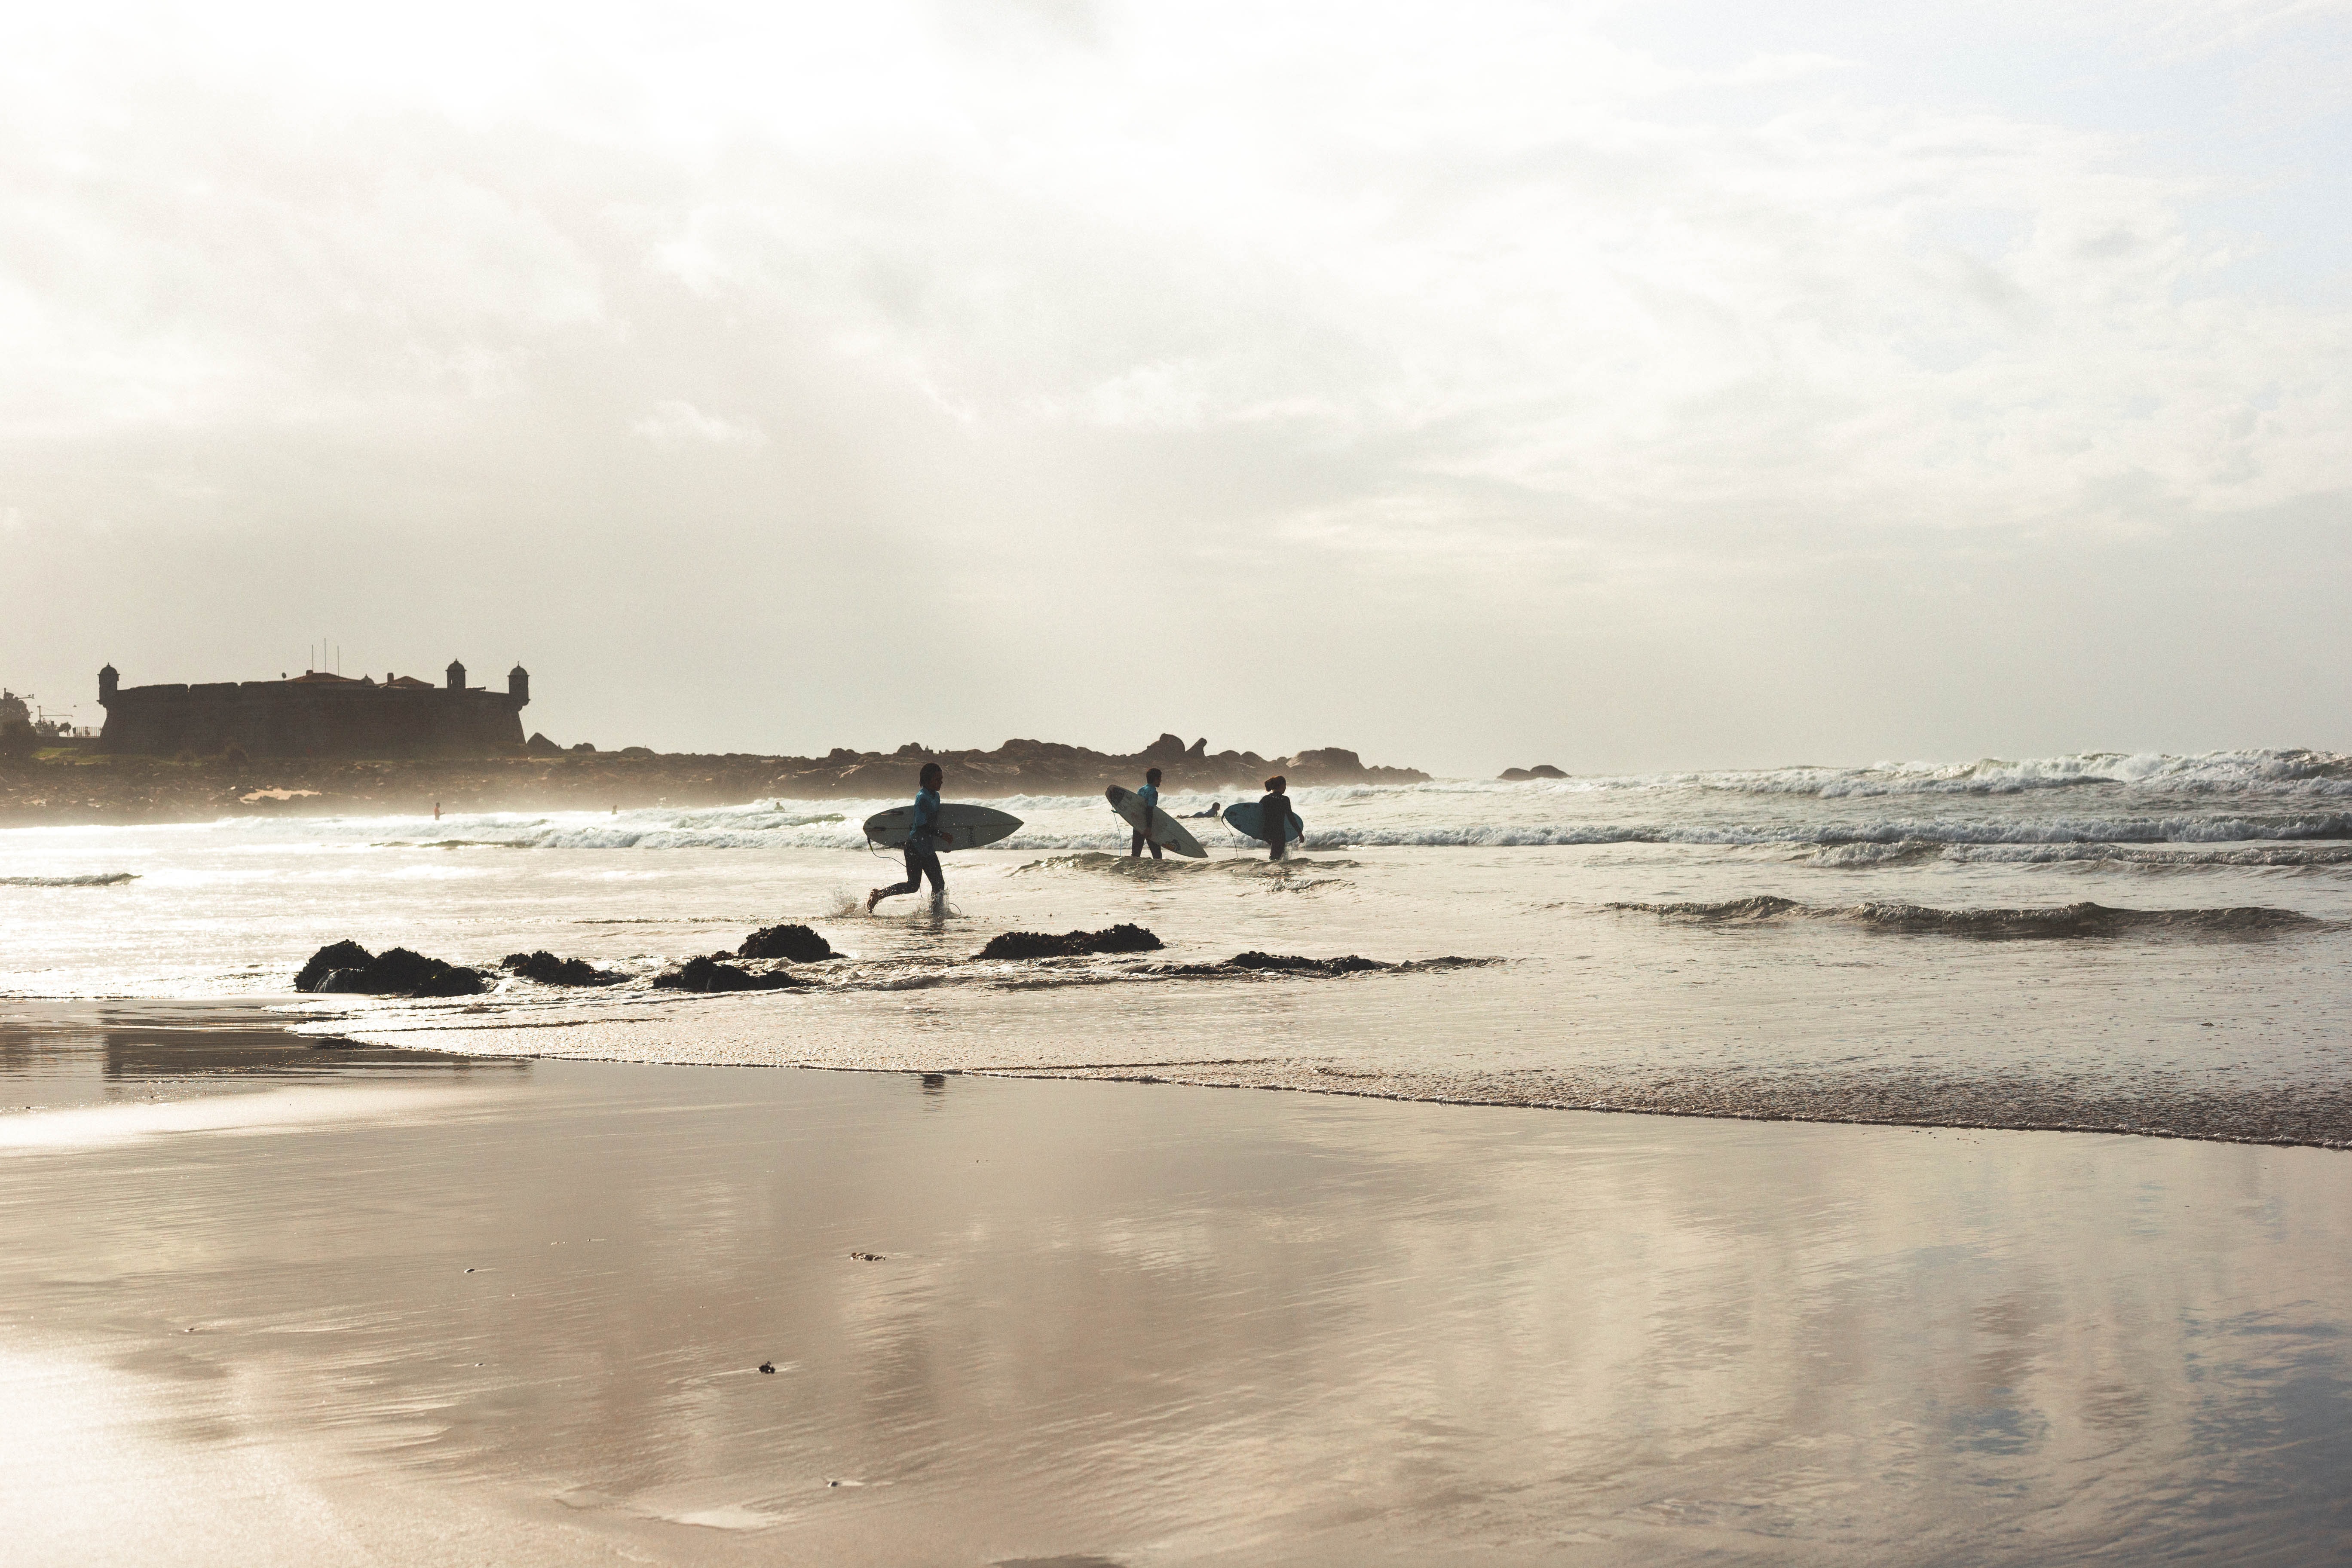 Surfing is one of the many activities provided by our beaches